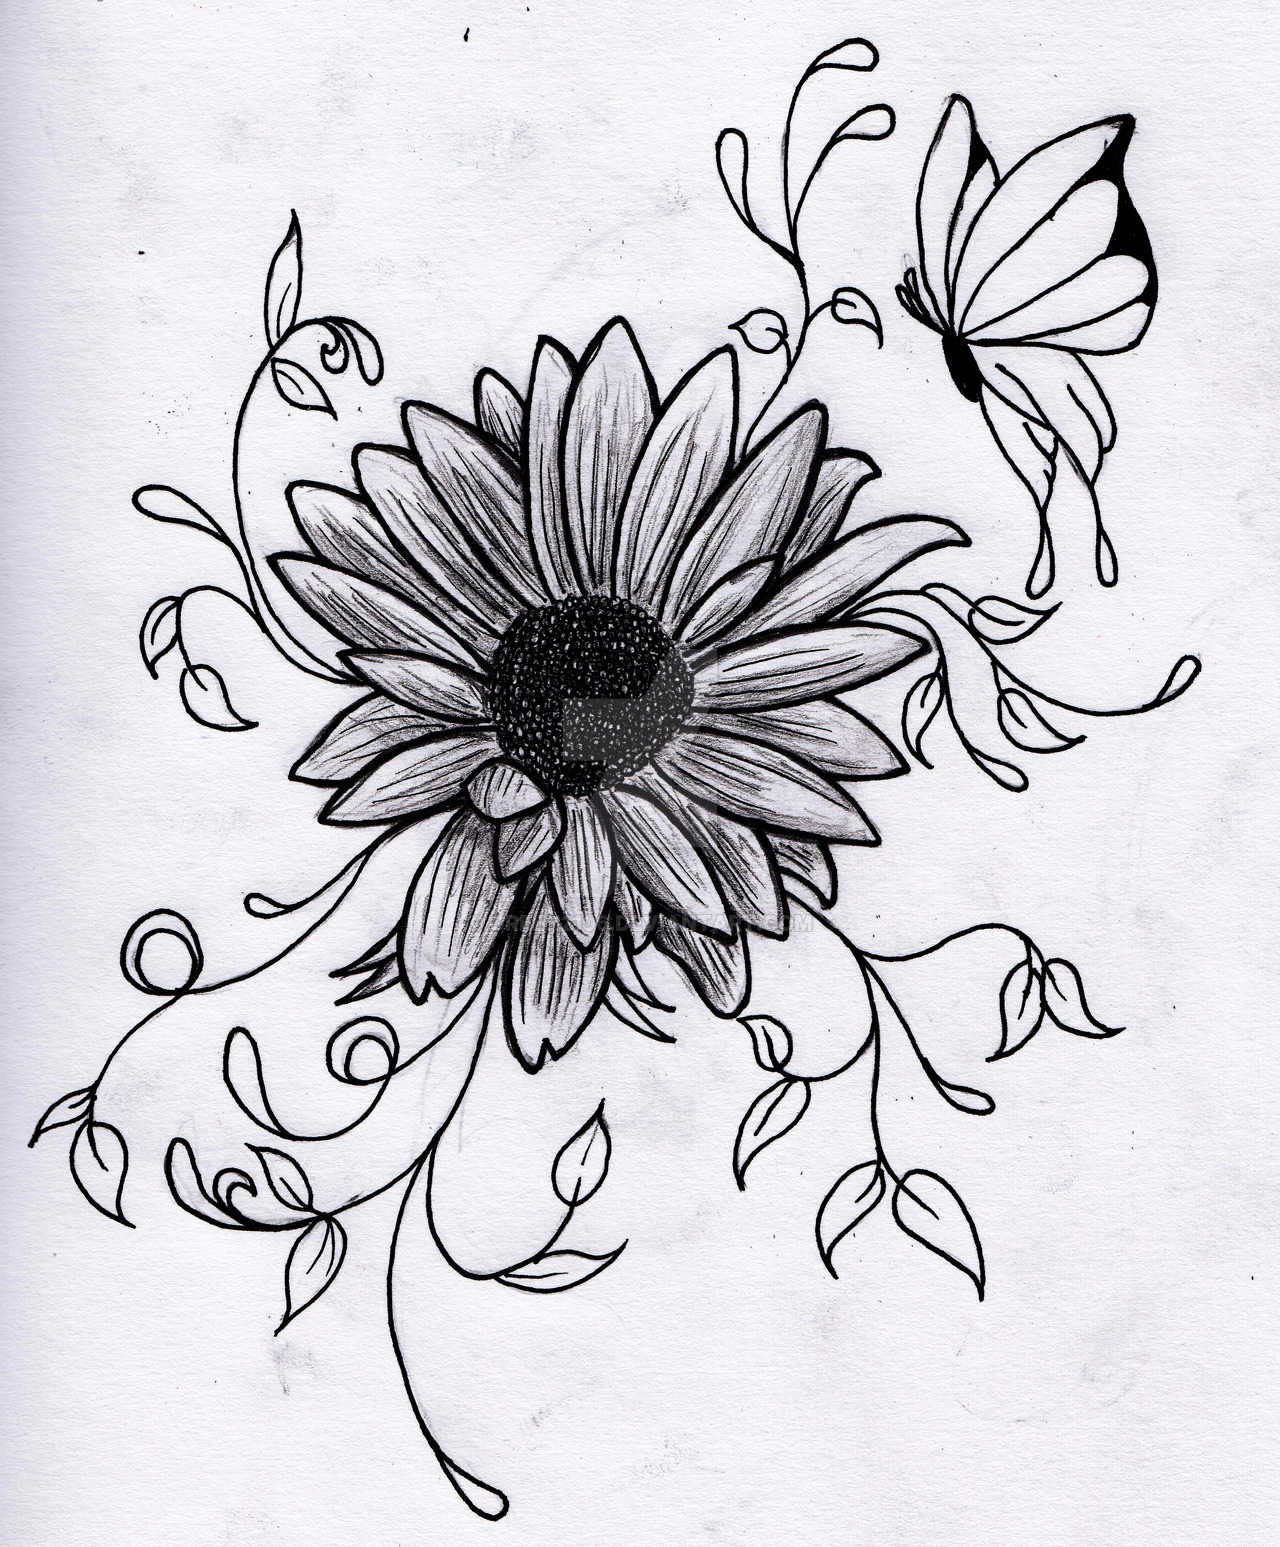 kristas flower drawing by green2106 on Clipart library